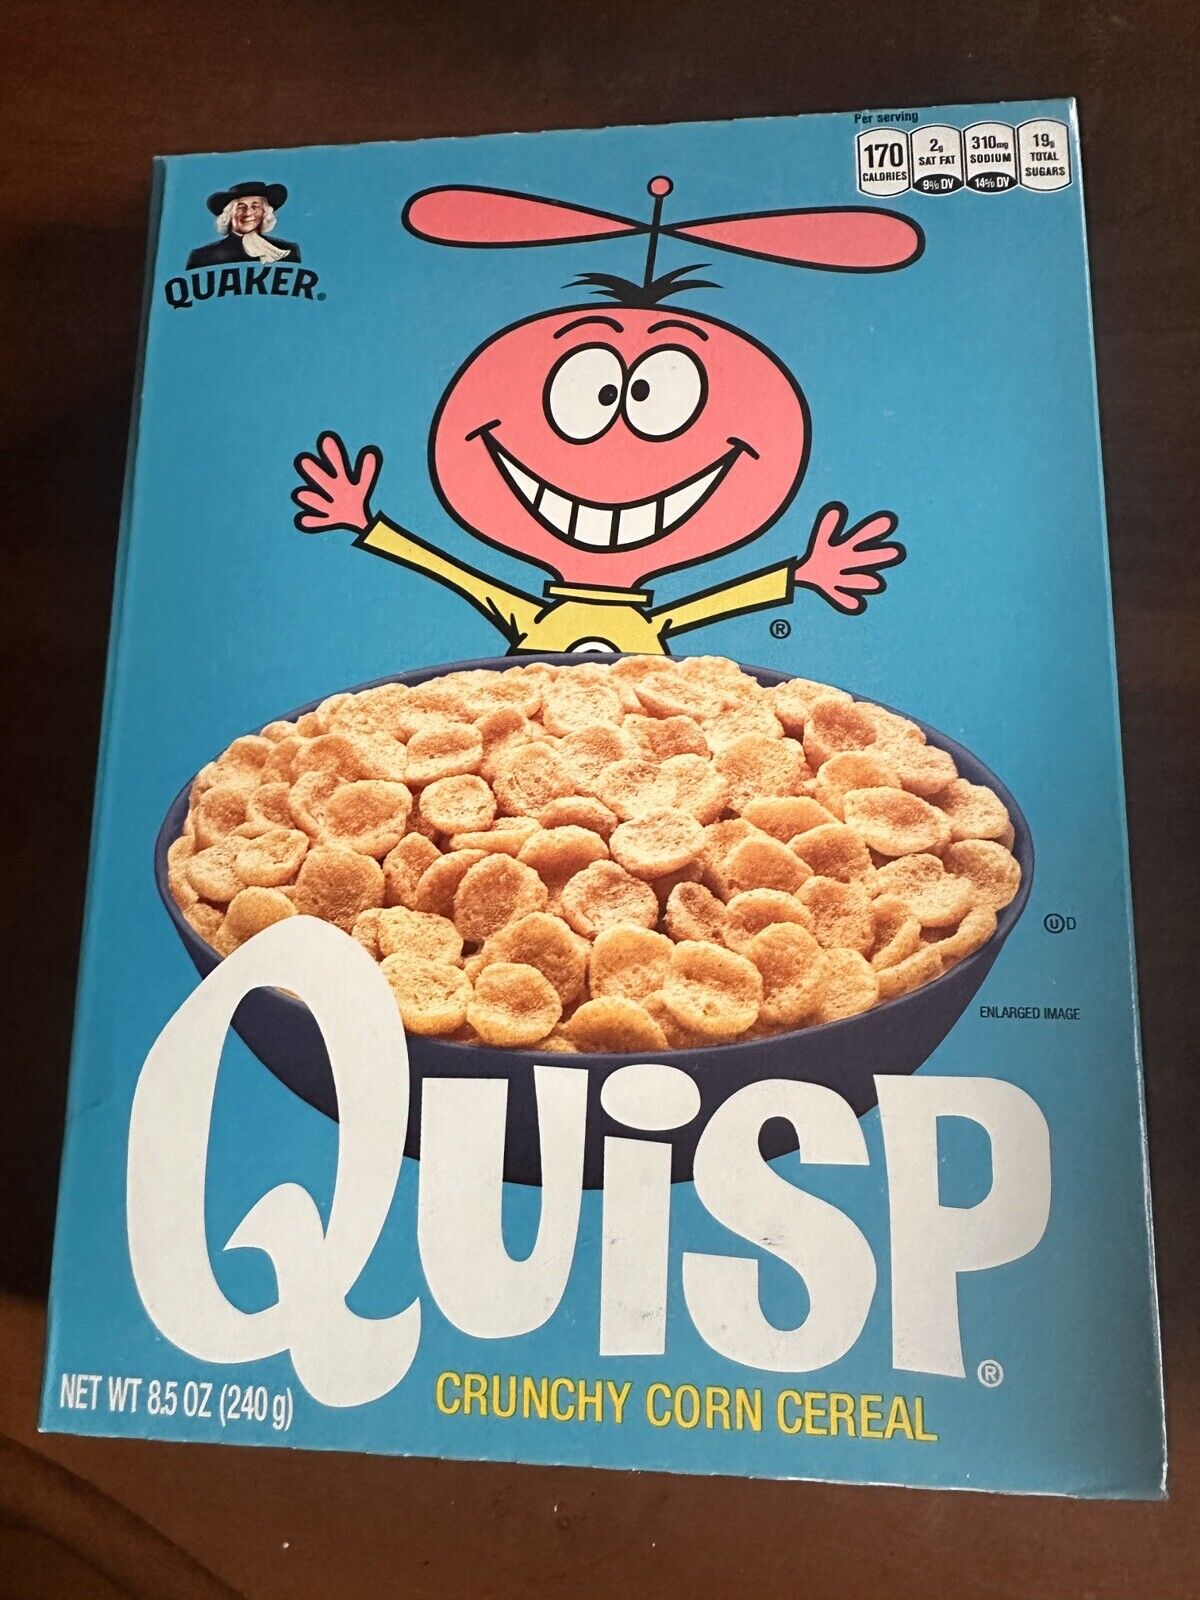 1 Empty Quisp CerealBox (Quaker Oats Crunchy Corn Cereal) Retro-Vibe Collection